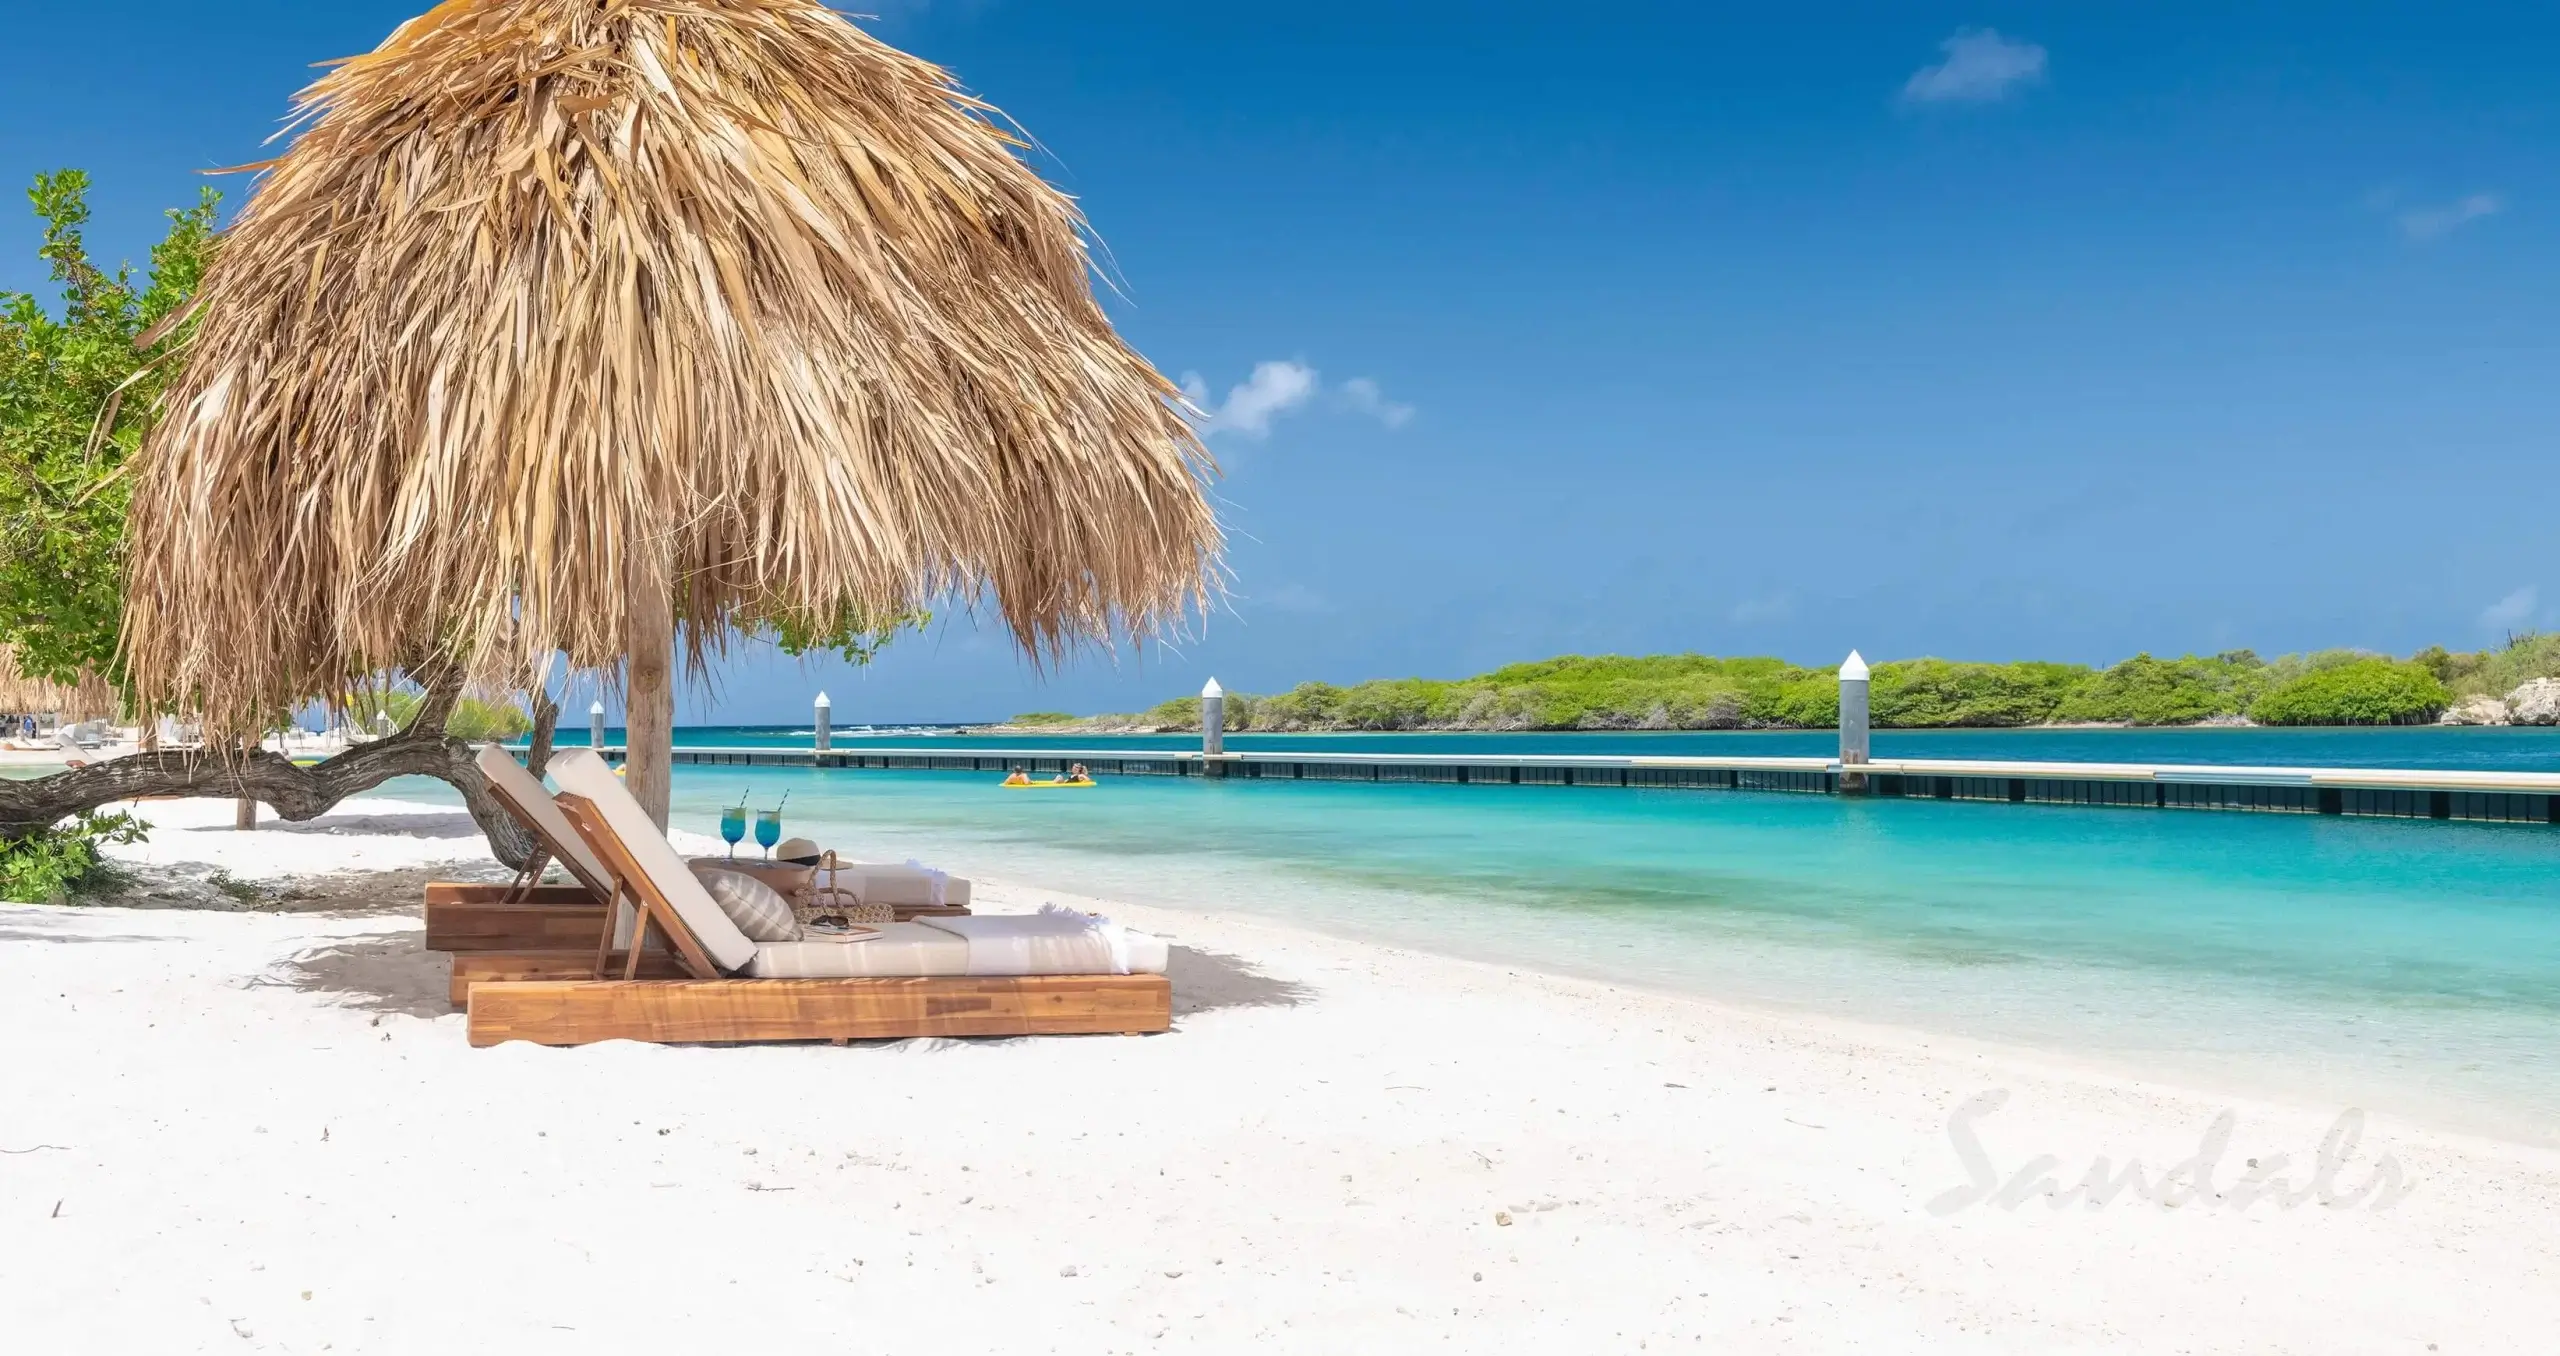 Private beach palapa at sandals curacao with white sand and clear water.